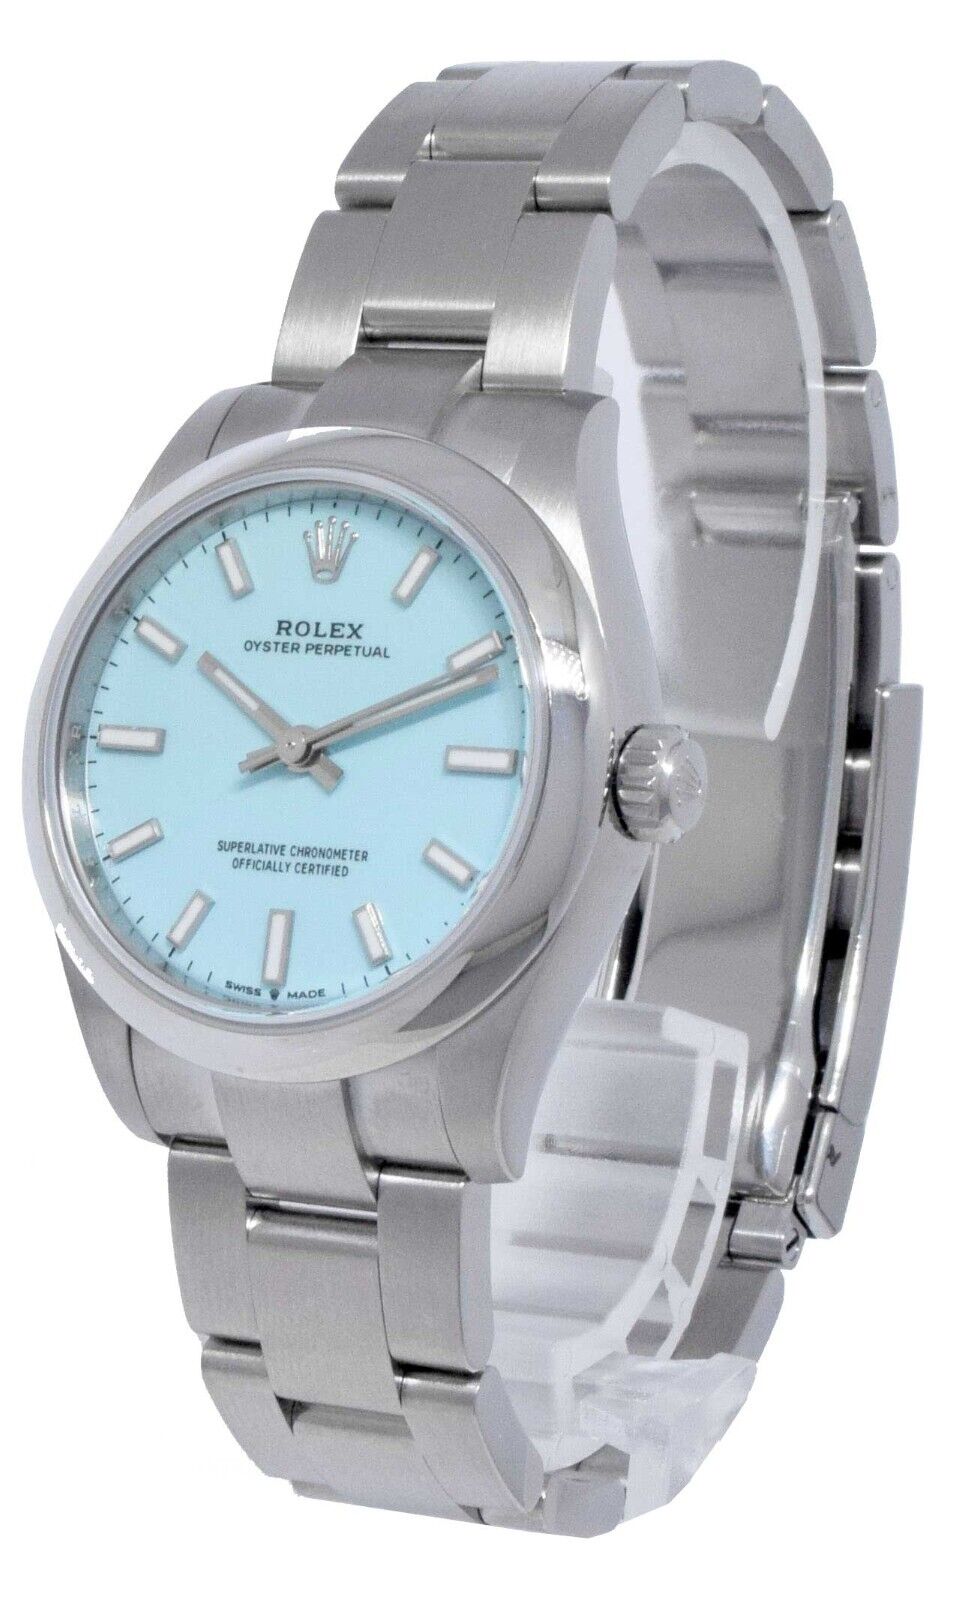 NEW Rolex Oyster Perpetual 31 Steel Blue Dial Mens Watch Box/Papers '20 277200